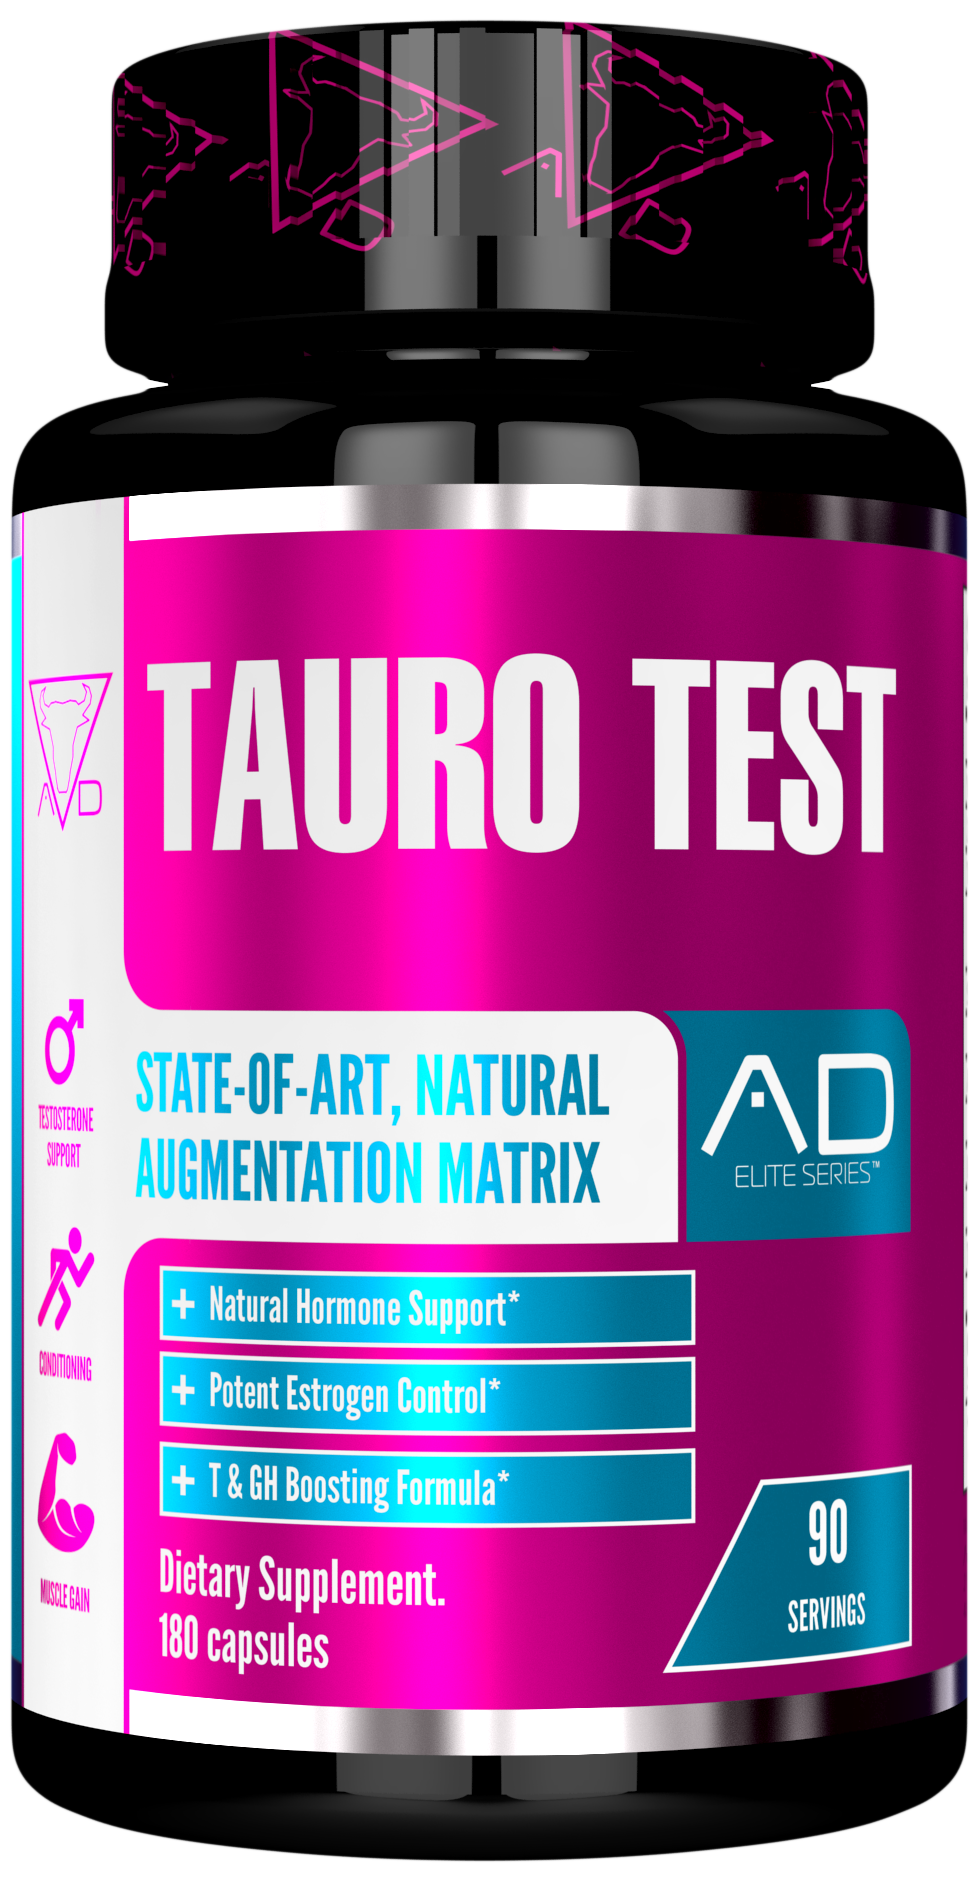 Project AD | Tauro Test Project AD $54.95